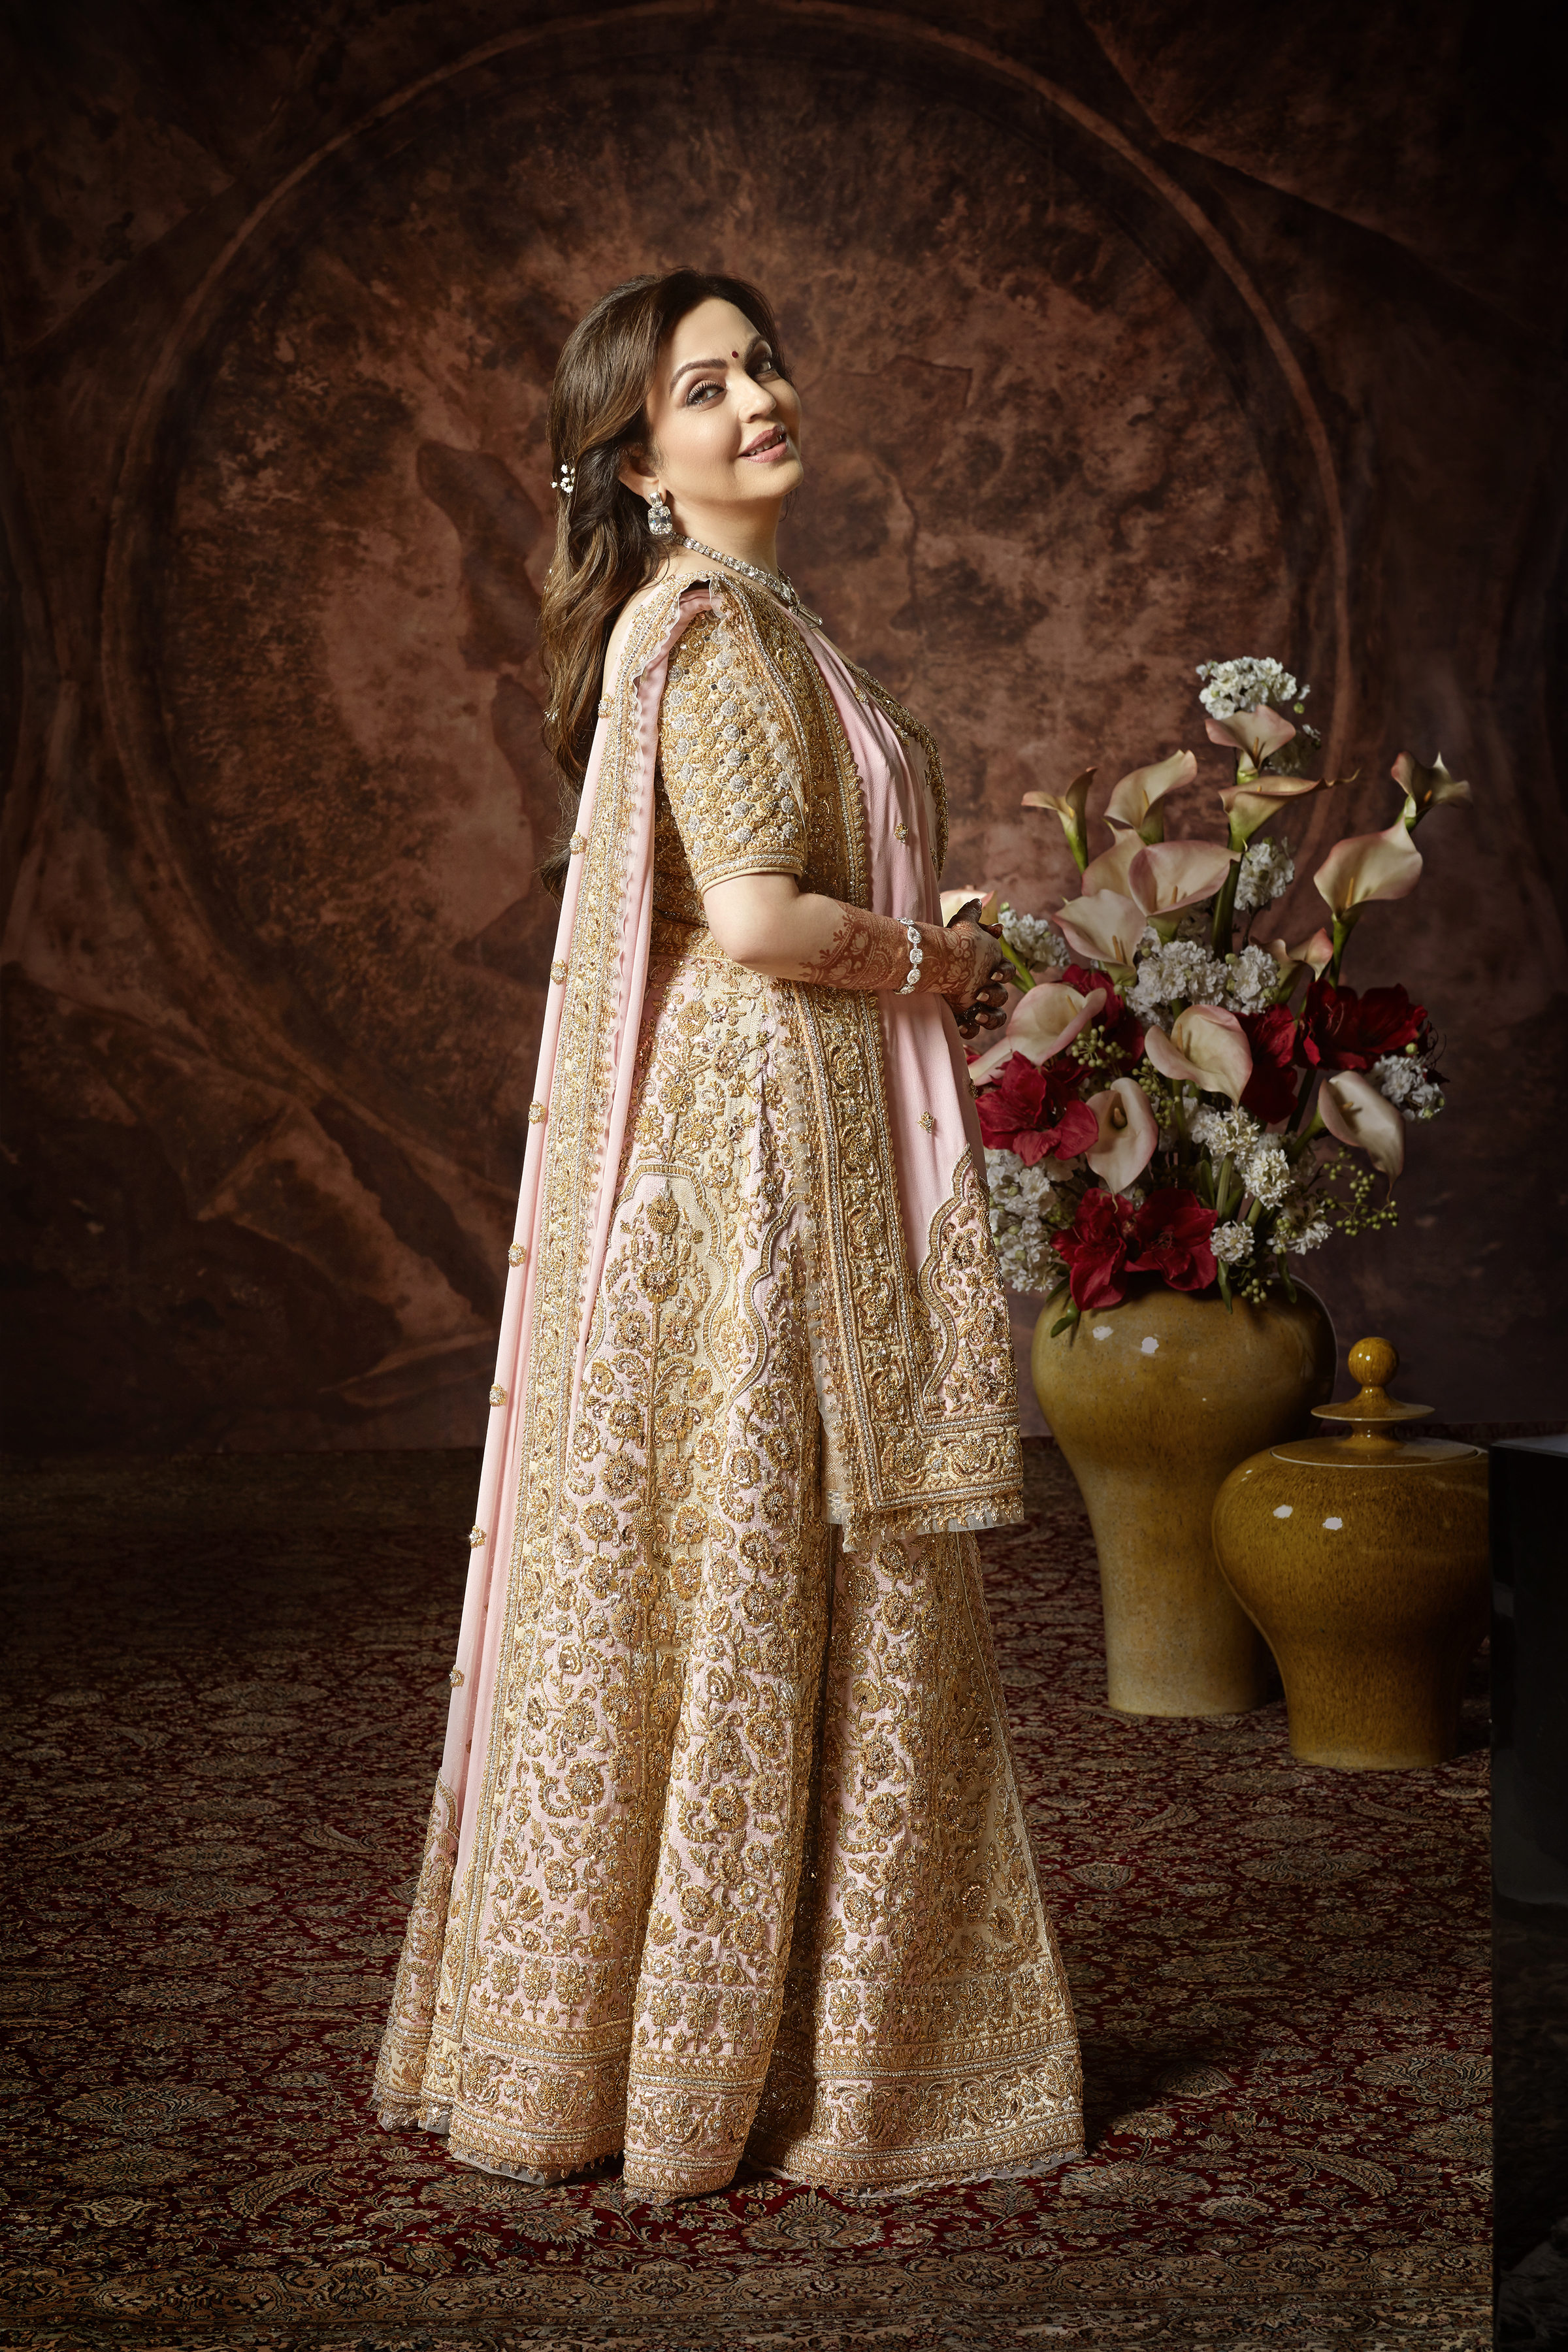 For the reception, Nita Ambani wore a two-coloured ghagra in light beige and light pink, embellished in vasli, mukaish and zardosi work. A pink dupatta with a hand-embroidered pallav with borders and booties was paired with a zardosi mukaish blouse